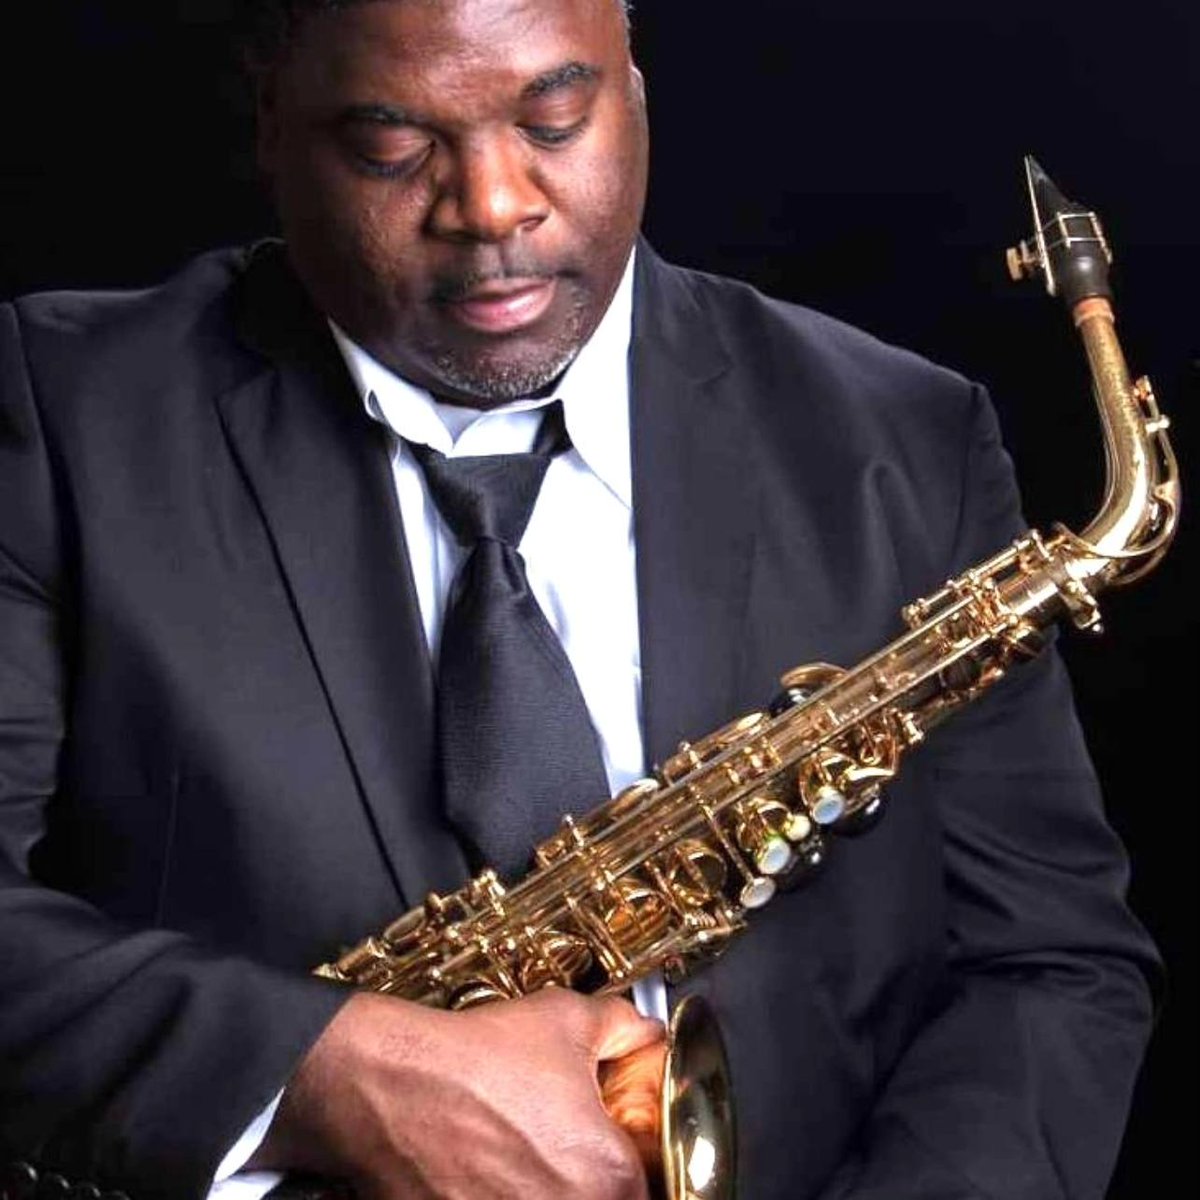 Ignatius Hines is returning to Beau Monde NEXT THURSDAY, 5/9 from 8-10pm for a live saxophone performance! Join us!
#beaumonde #livemusic #livejazz #atllivemusic #saxophone #cigarbar #atlcigars #johnscreek #alpharetta